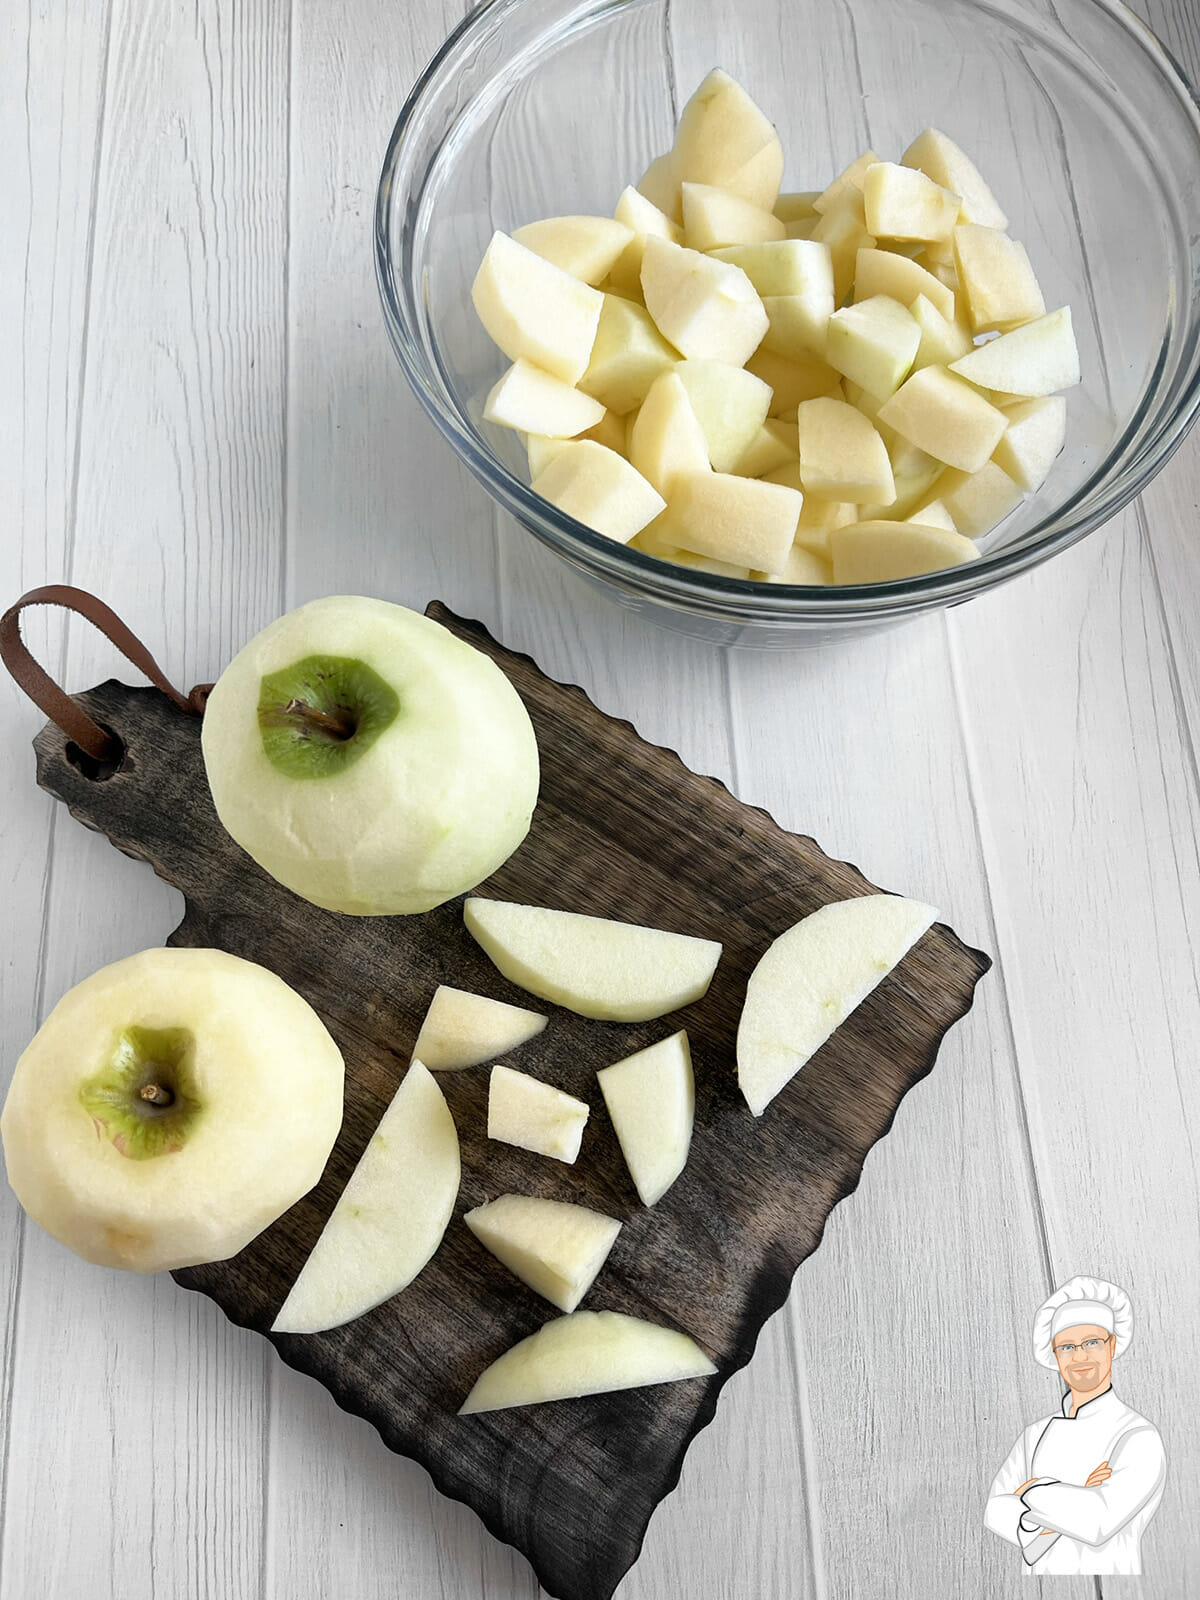 Chopped apples to make Instant Pot applesauce.